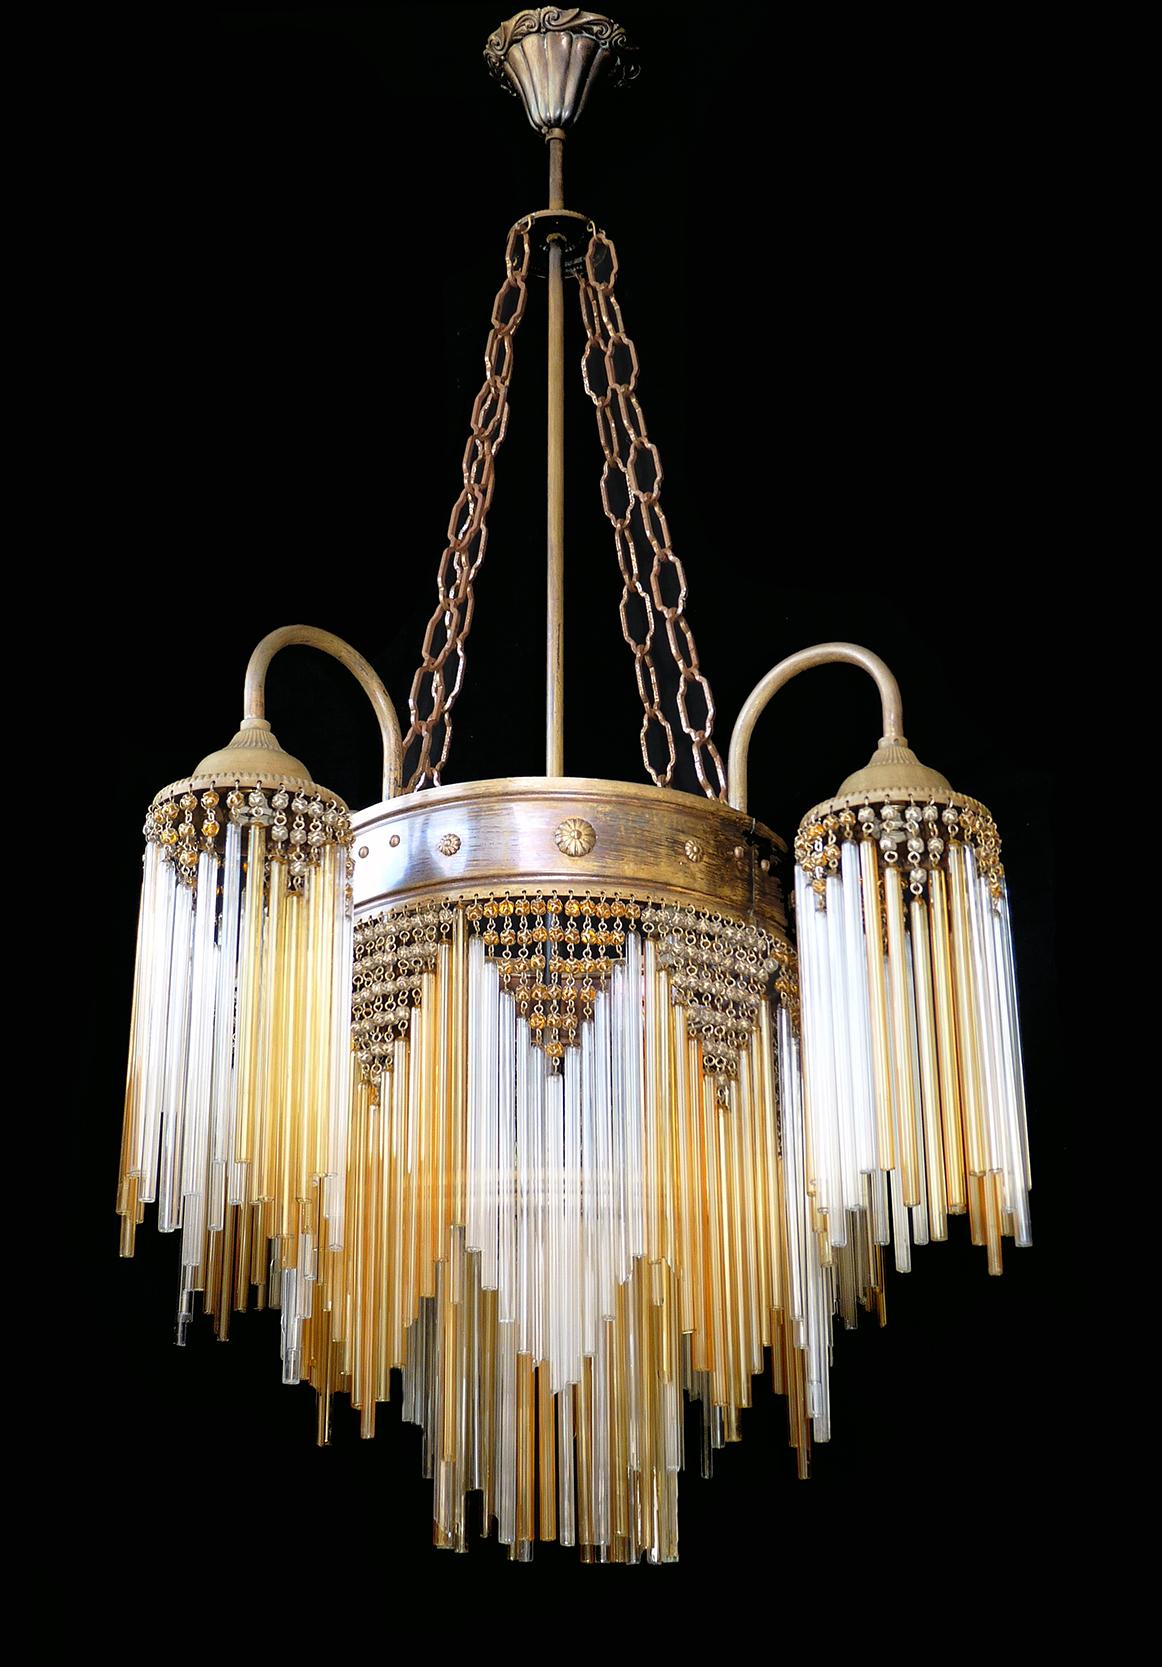 Fabulous antique Art Deco or Art Nouveau chandelier in clear and amber beaded glass.
Measures:
Diameter 22 in / 55 cm
Height 38 in / 95 cm
7 light bulbs E14/ good working condition.
Age patina.
Assembly required. Bulbs not included.